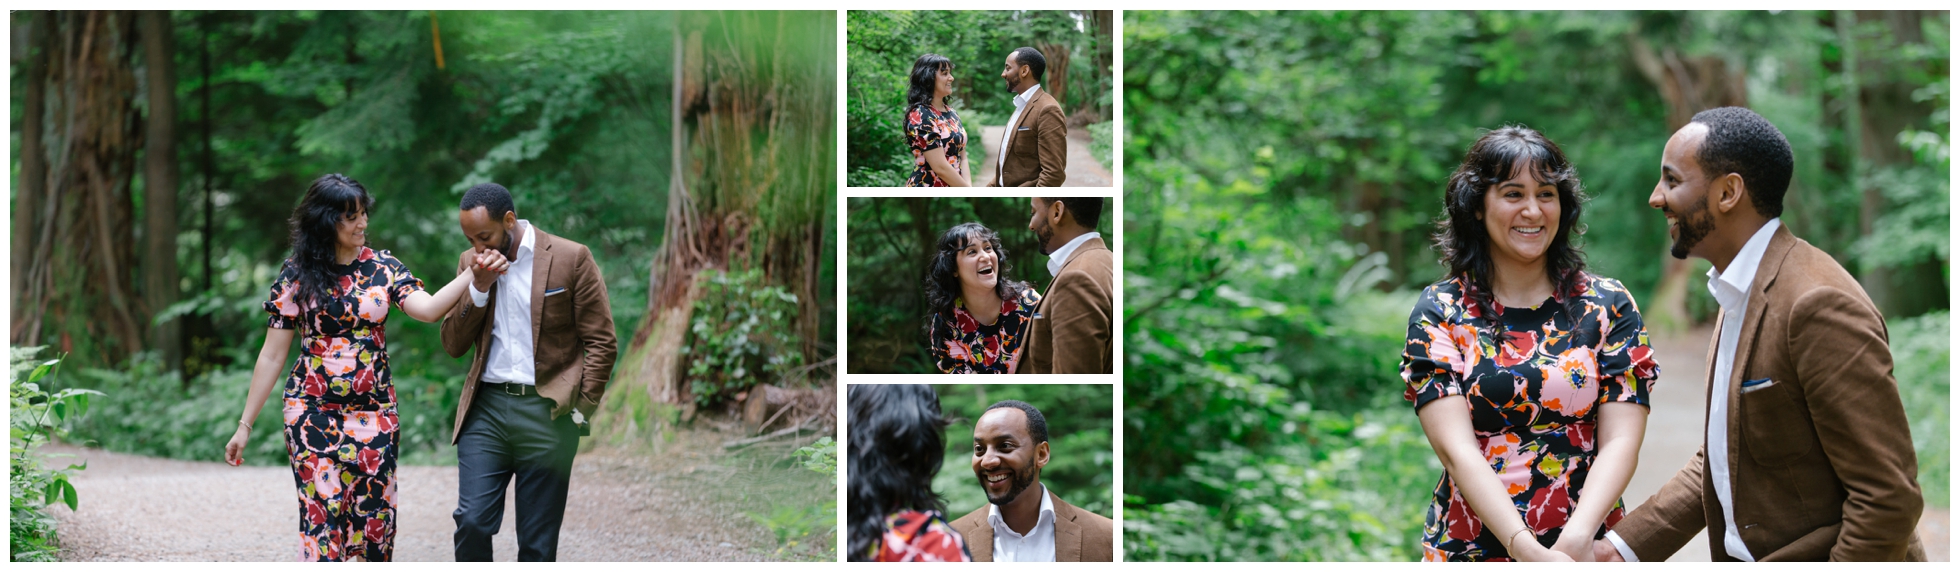 Tara and Petros Engagement Session (Life by Selena Photography)_0052.jpg